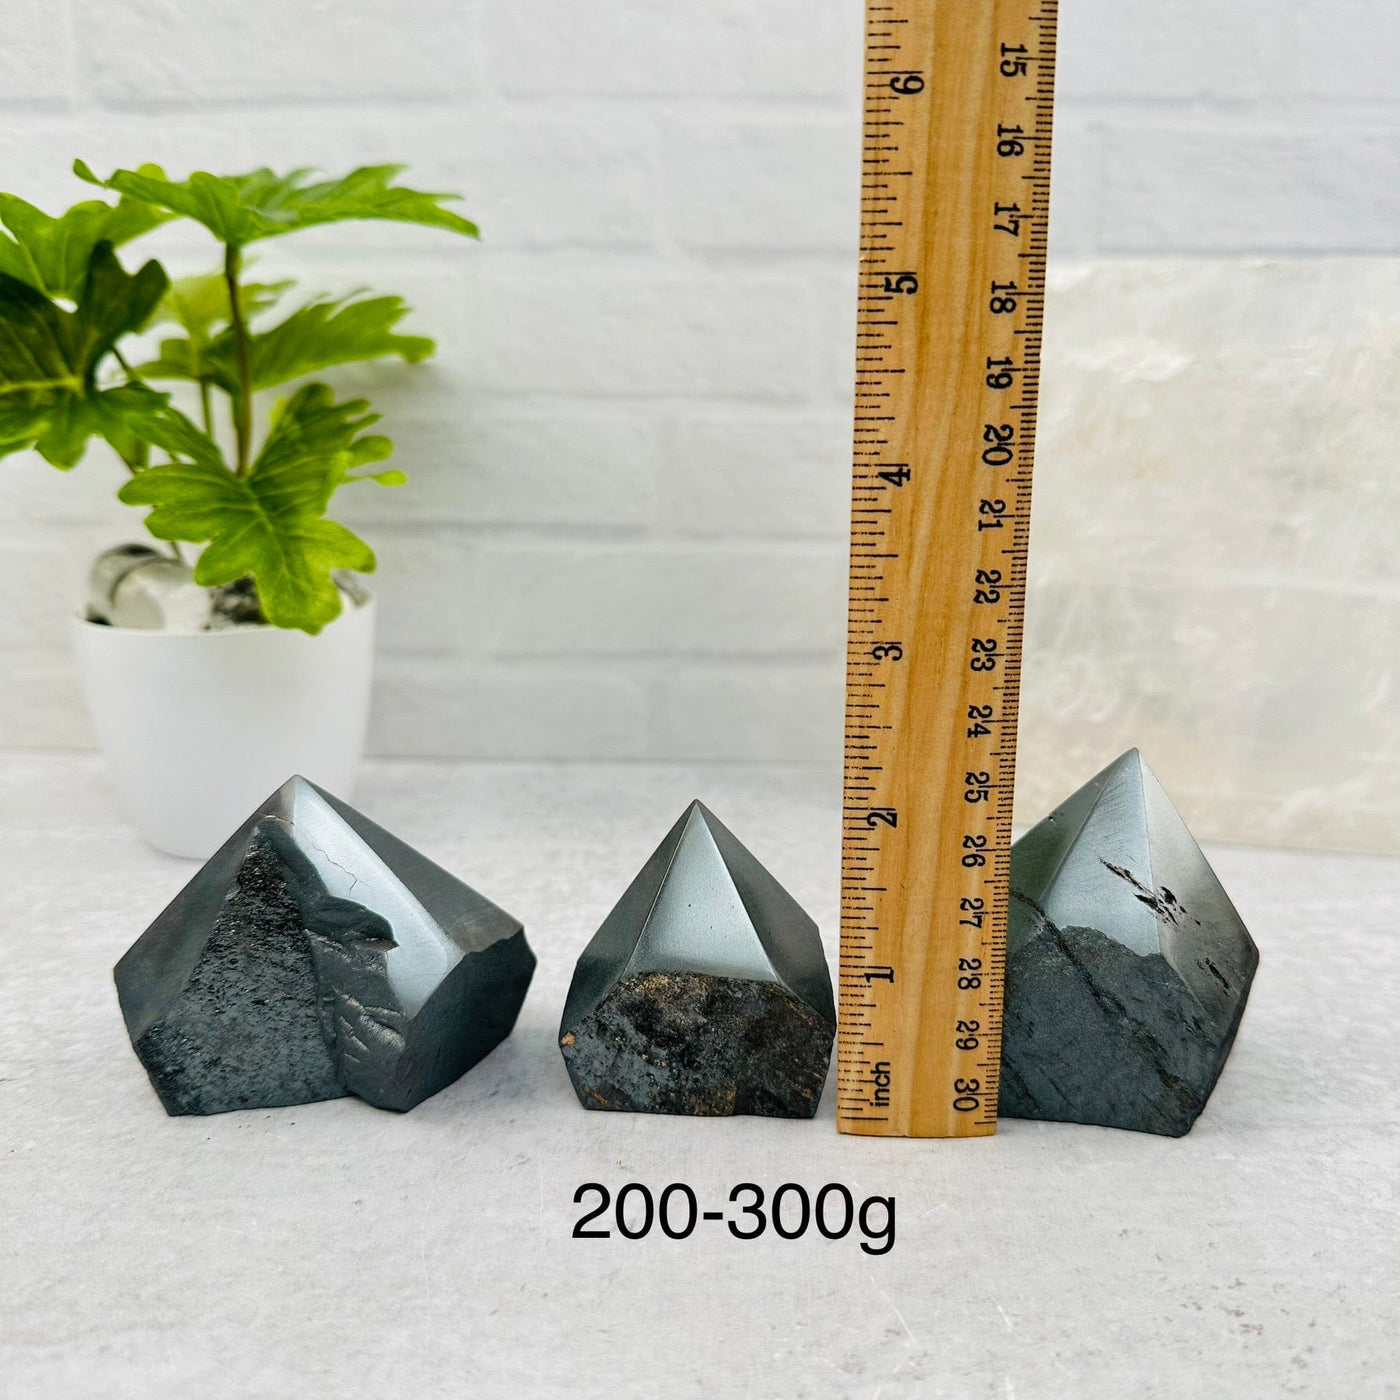 Hematite Semi-Polished Points - By Weight next to a ruler for size reference 